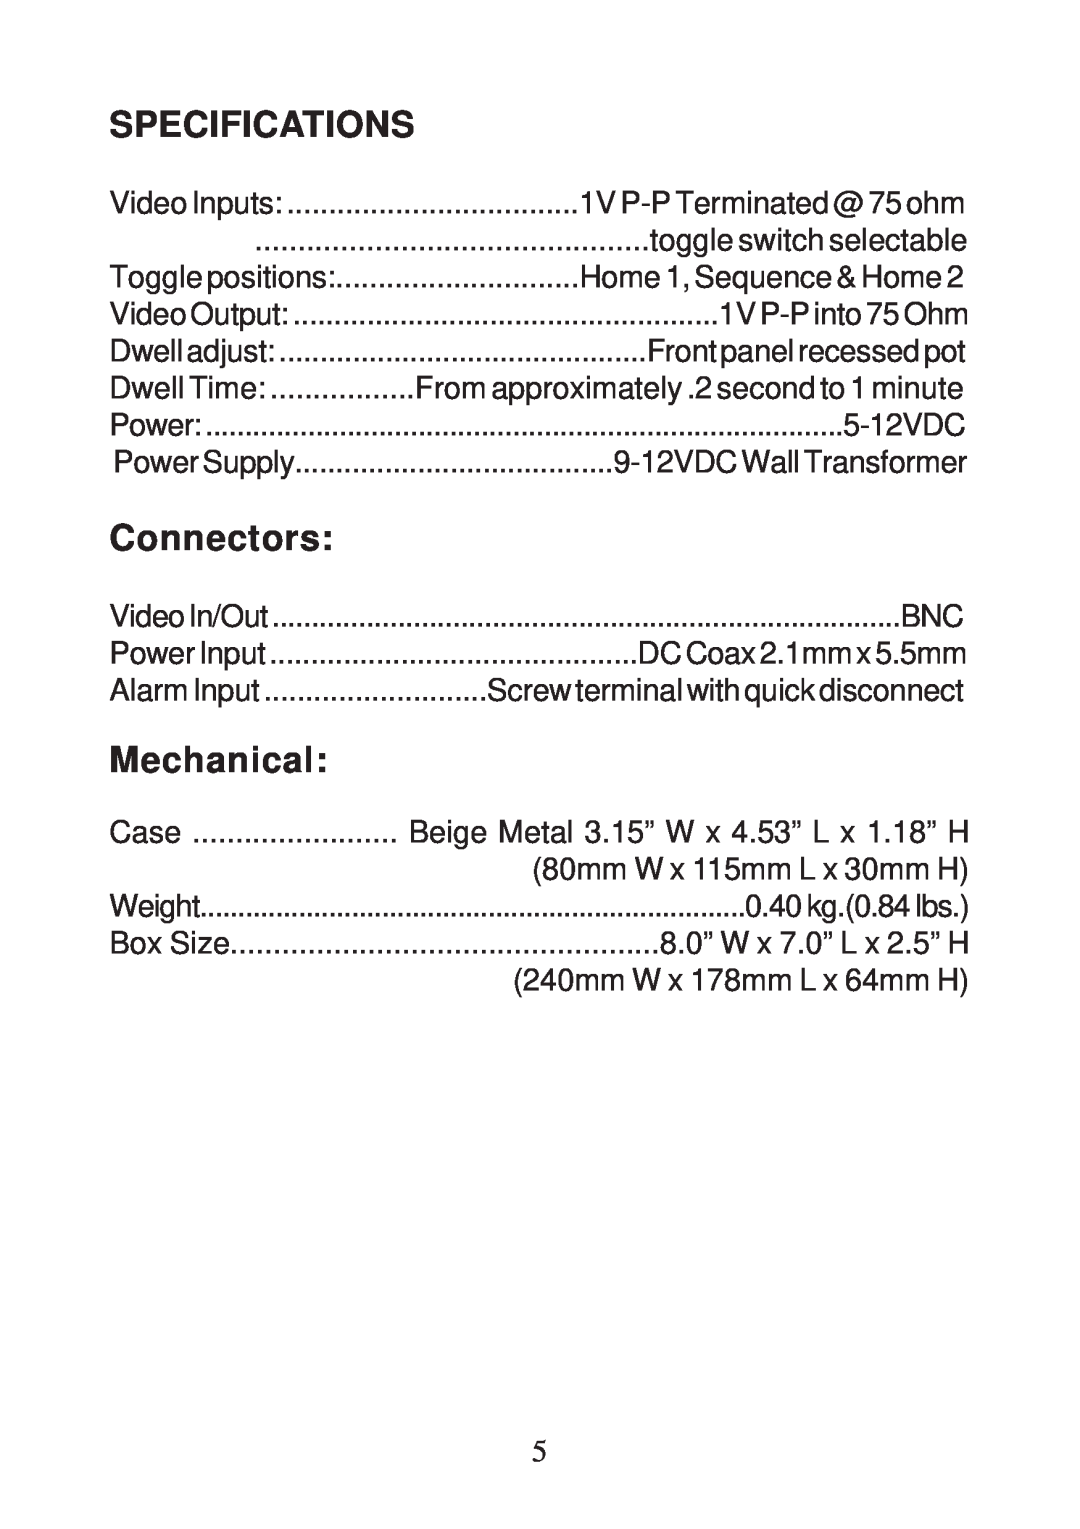 AVE 2PSWT operation manual Specifications, Connectors, Mechanical 